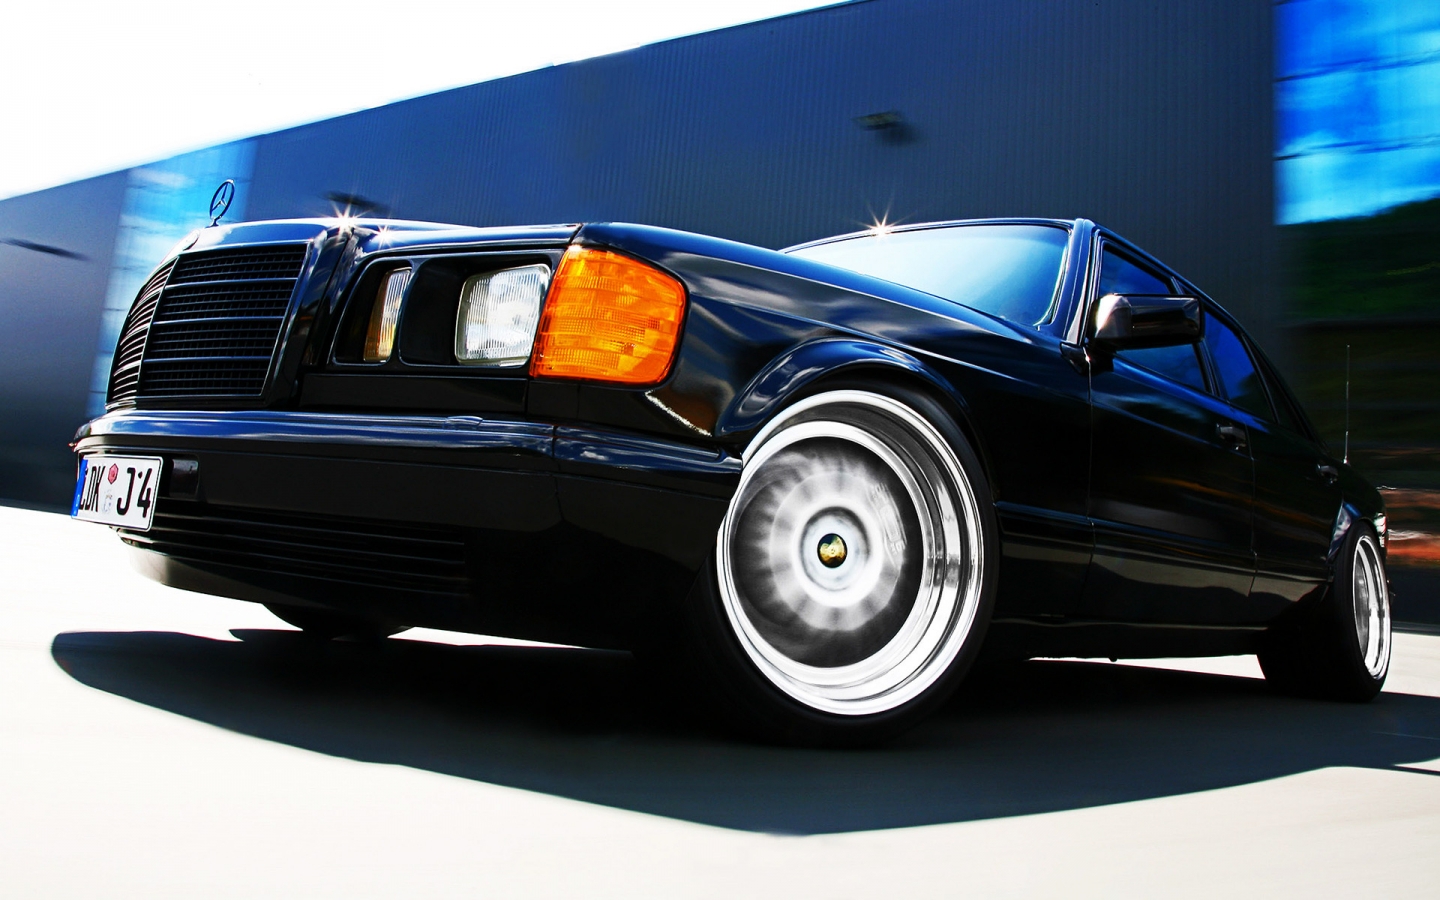 Mercedes 560SE 1991 for 1440 x 900 widescreen resolution